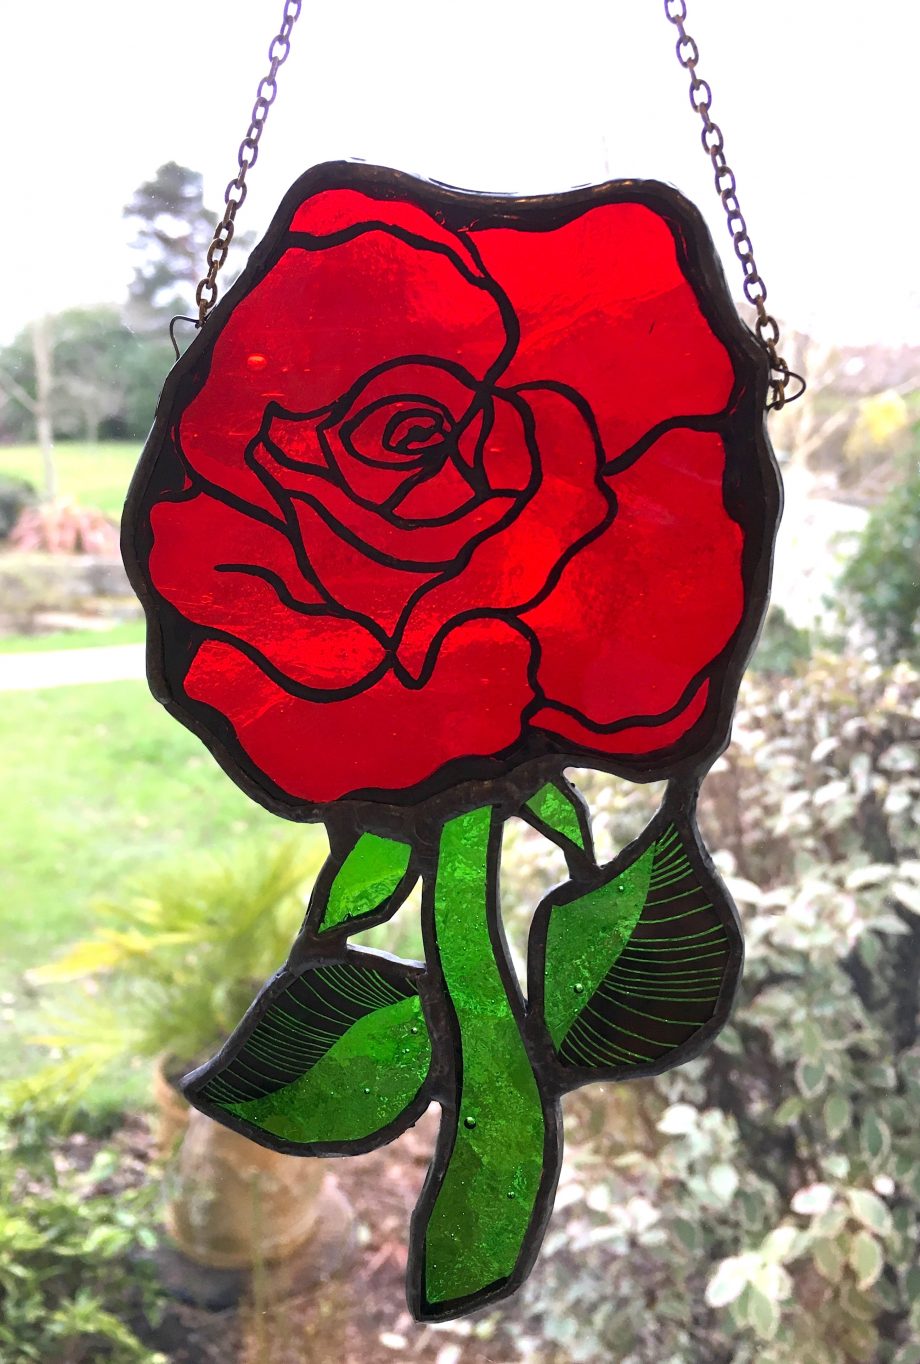 Stained glass red rose sun catcher